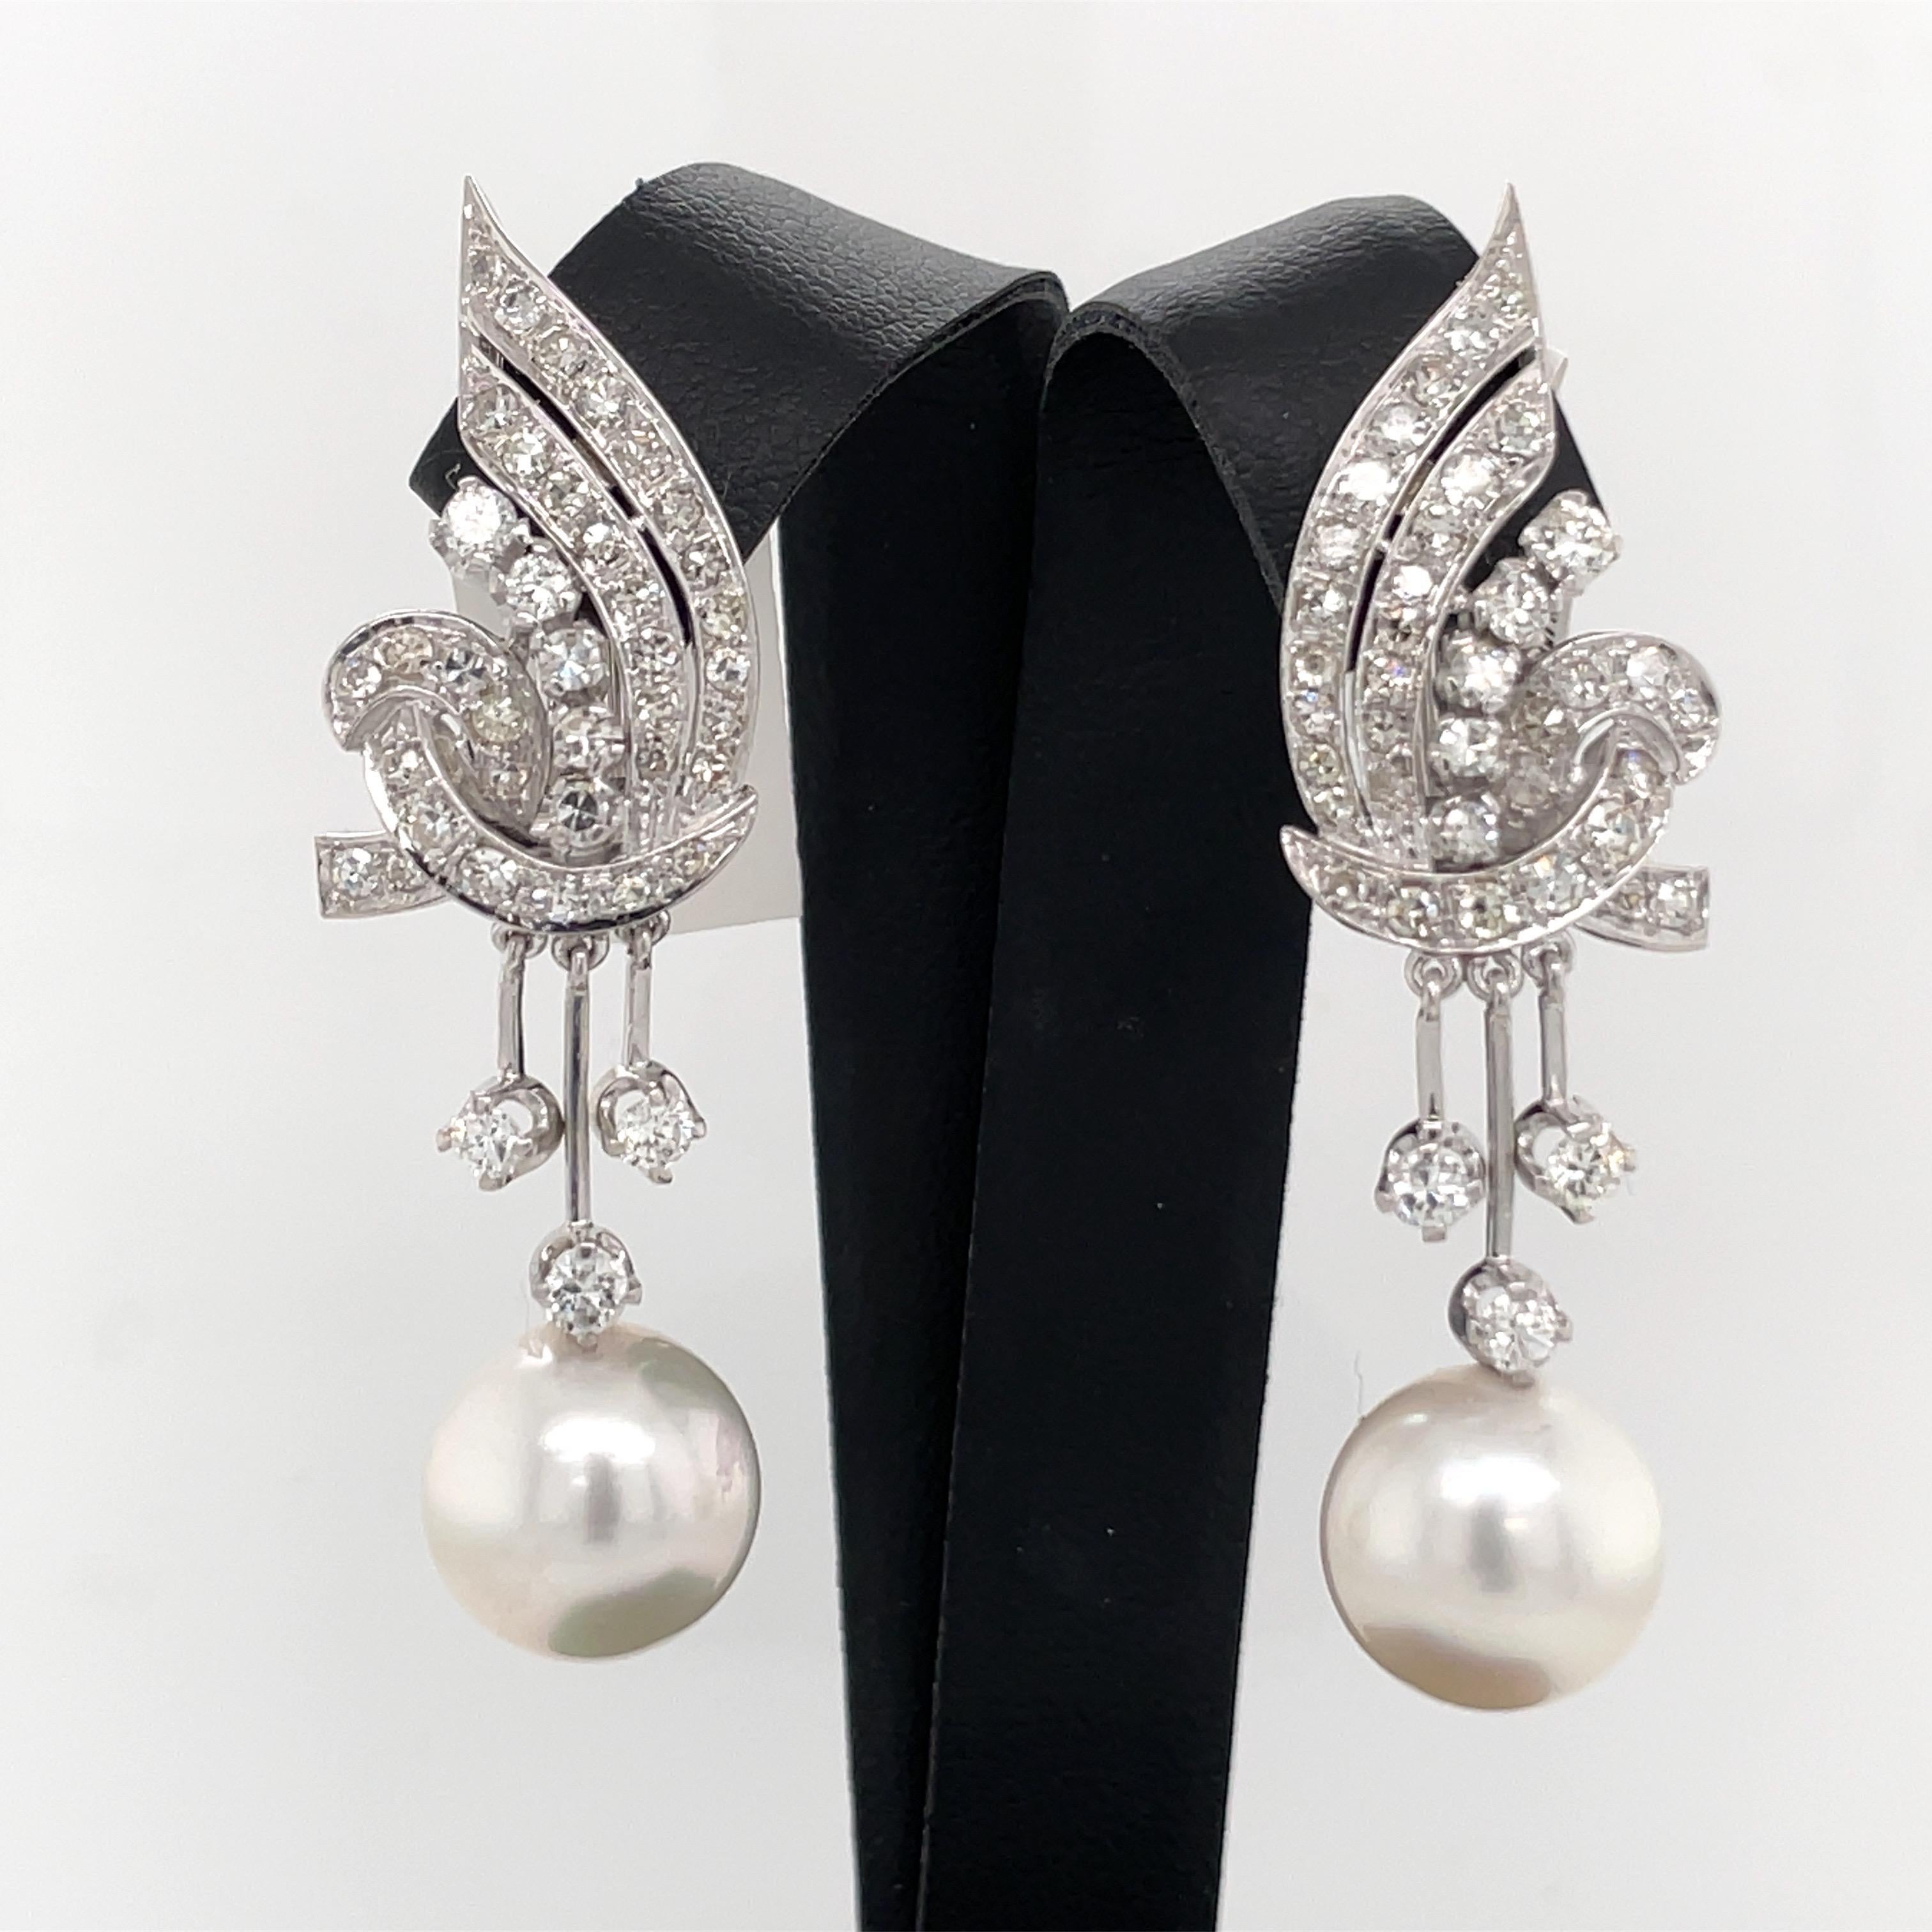 Vintage Platinum diamond drop earrings featuring round brilliants weighing approximately 2 Carats and a white pearl measuring 11.5 mm. 
Post can be put on earring. 